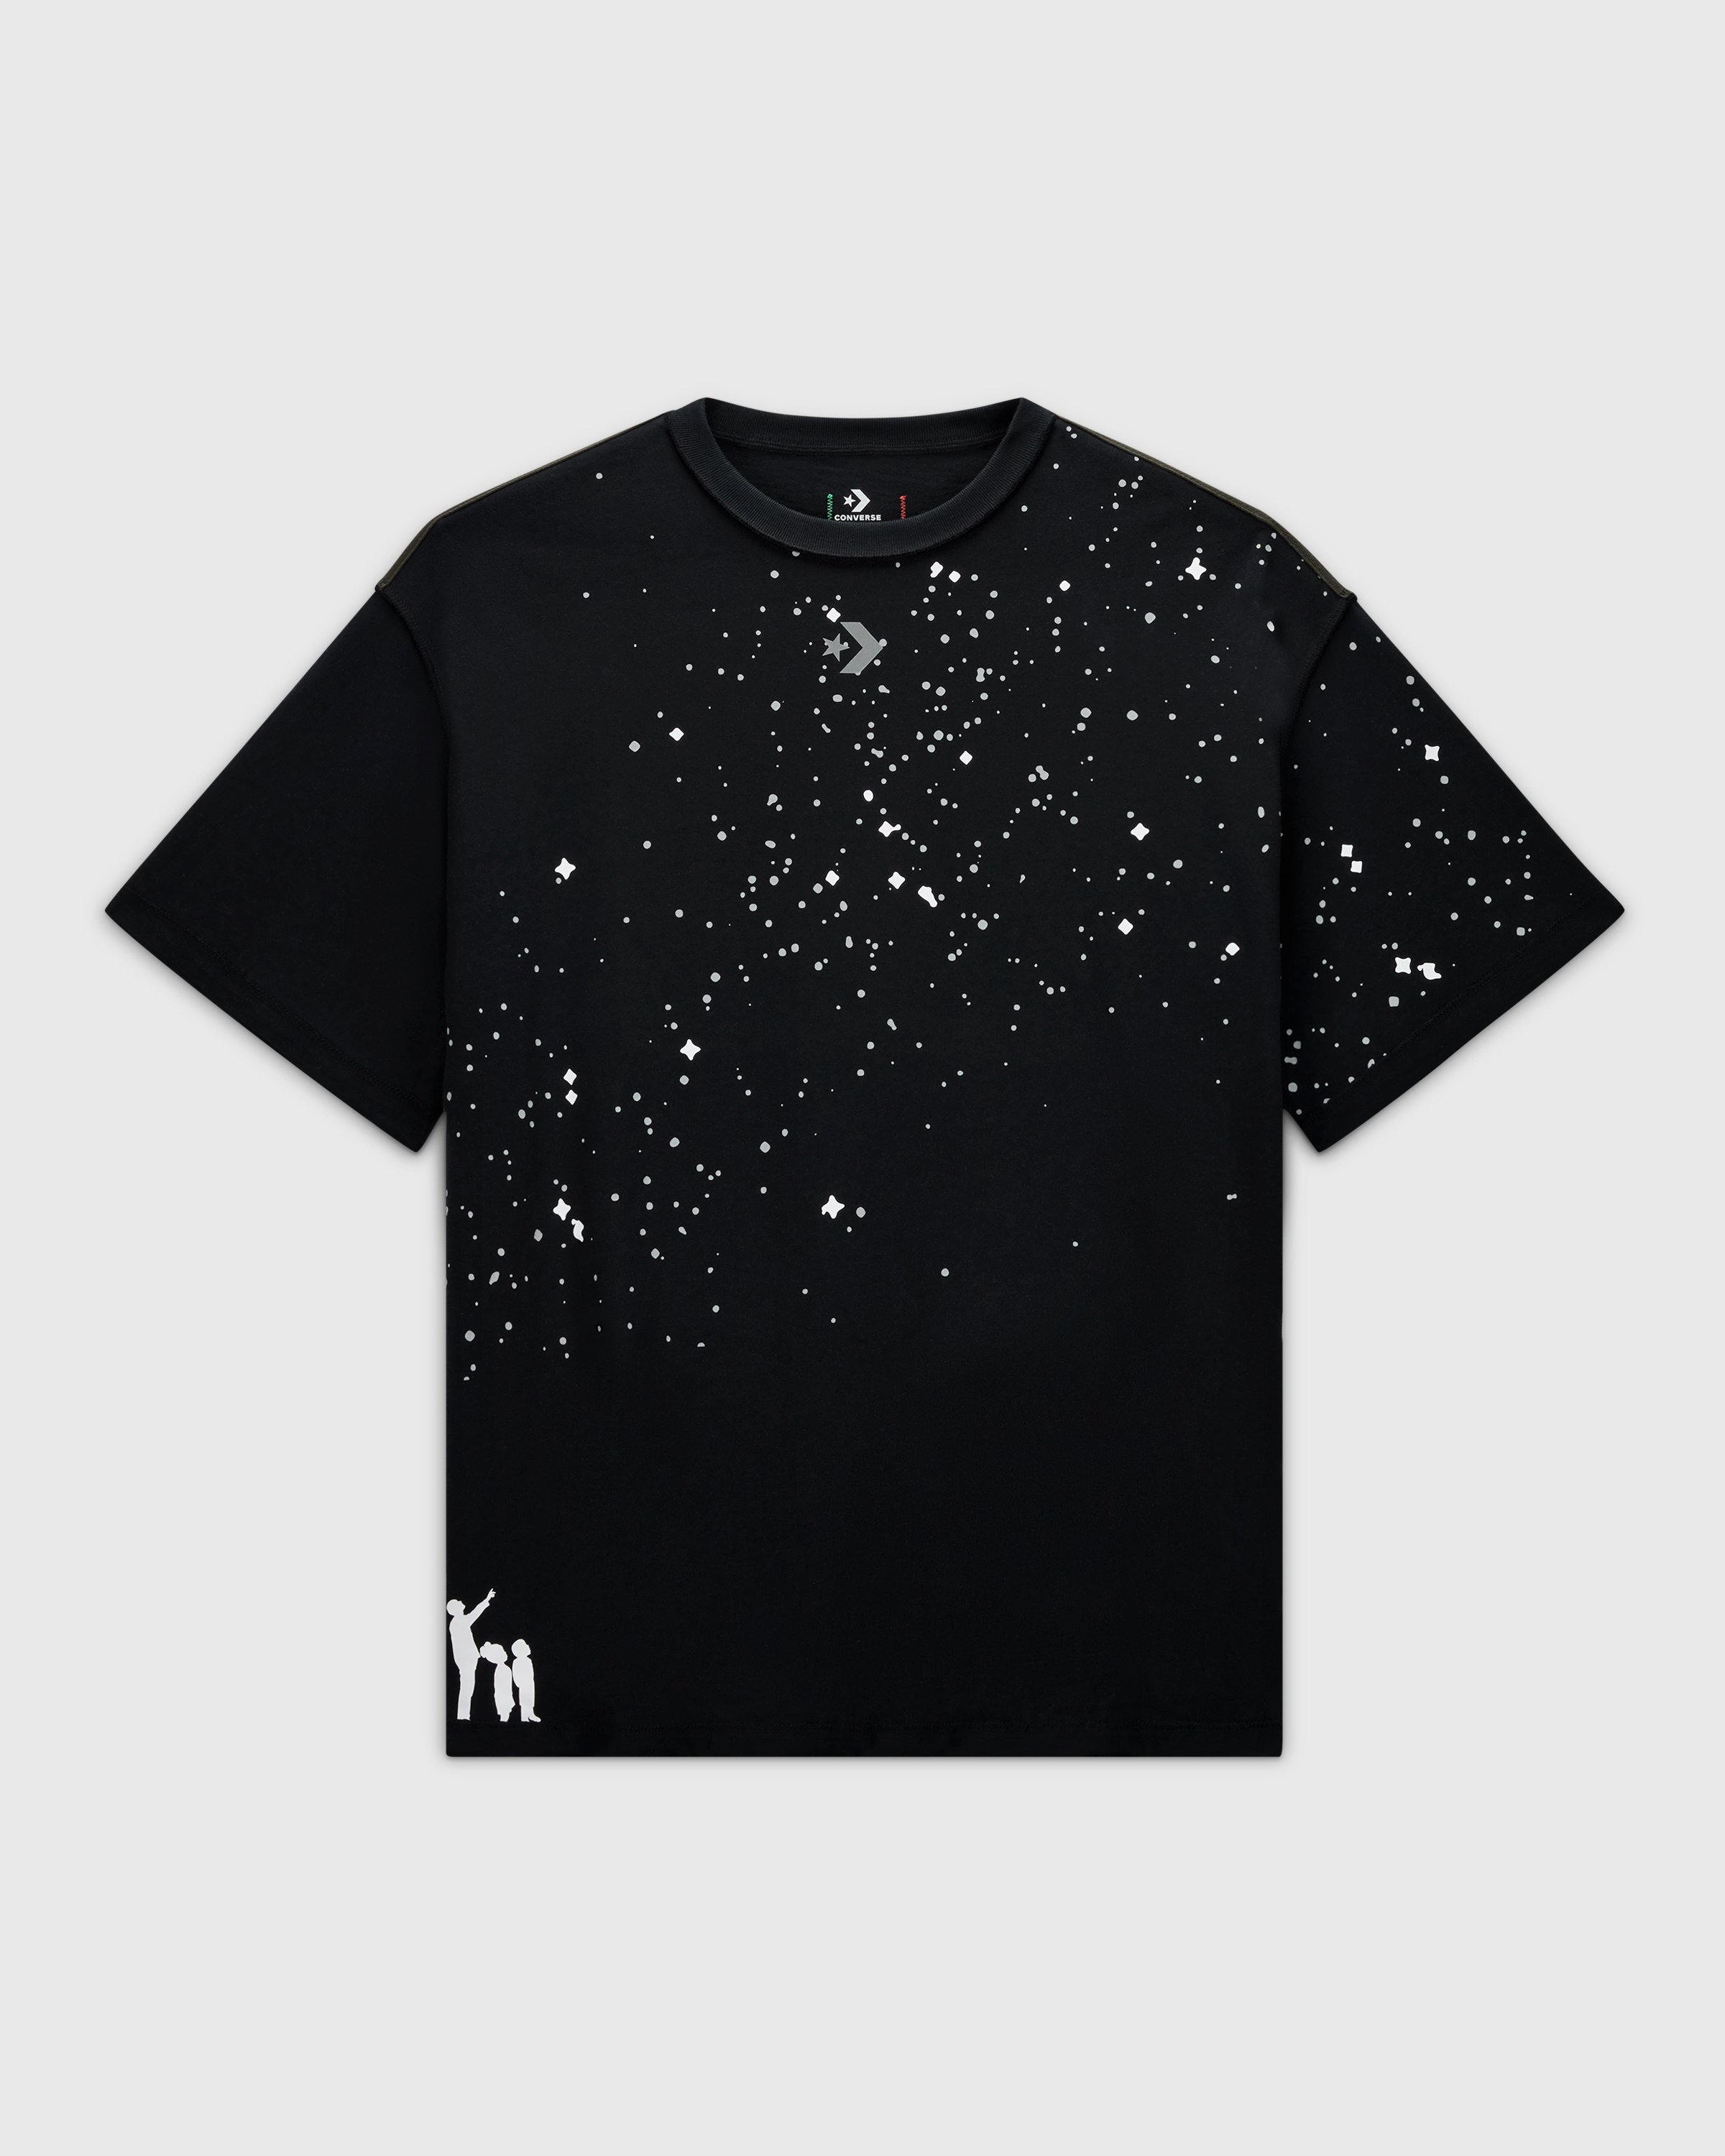 Converse x Barriers - Court Ready Crossover Tee Black - Clothing - Black - Image 2